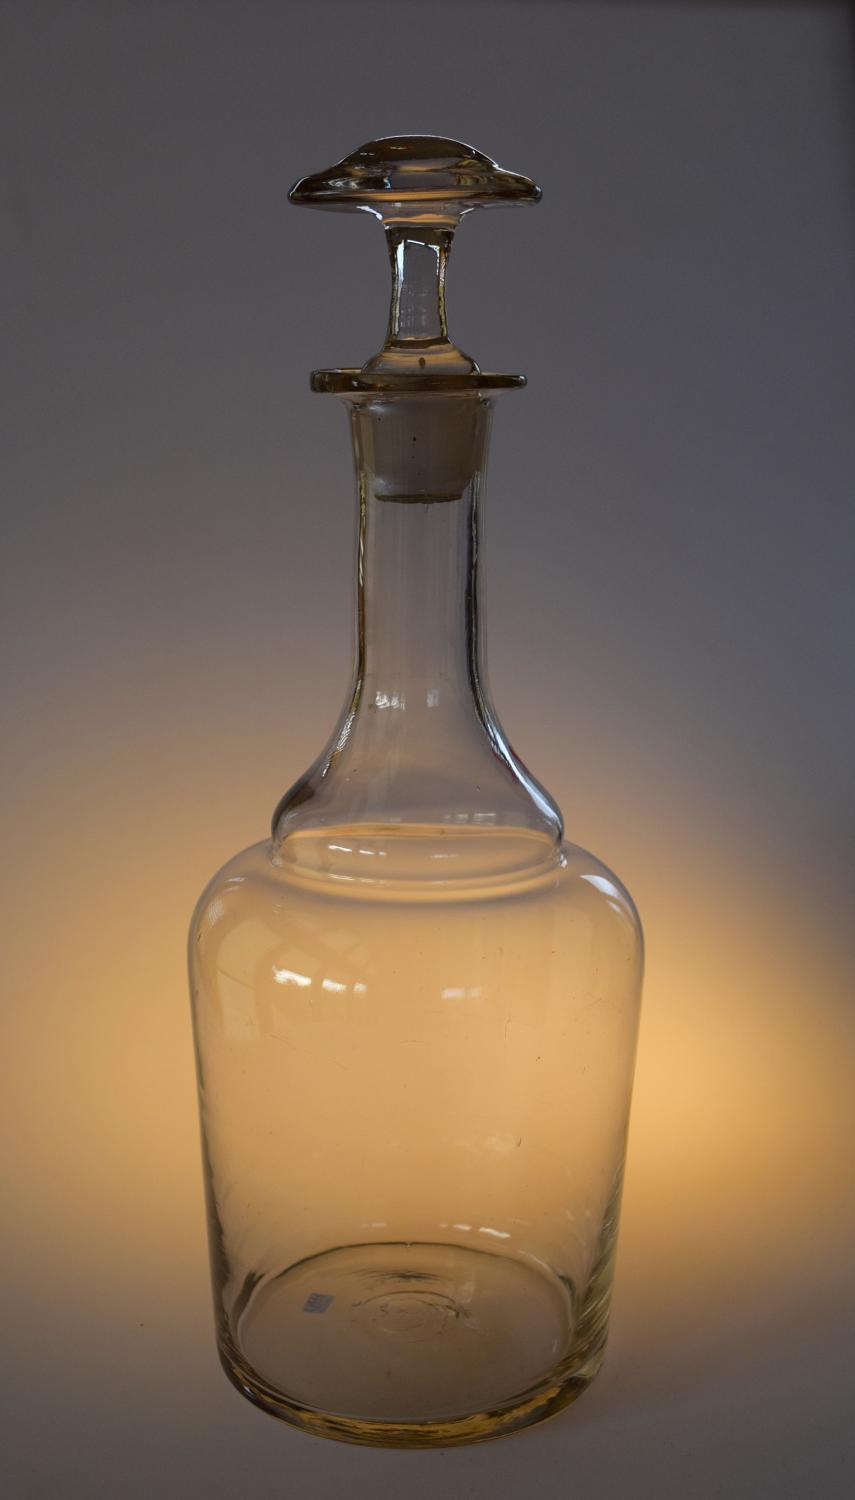 French cider decanter with stopper